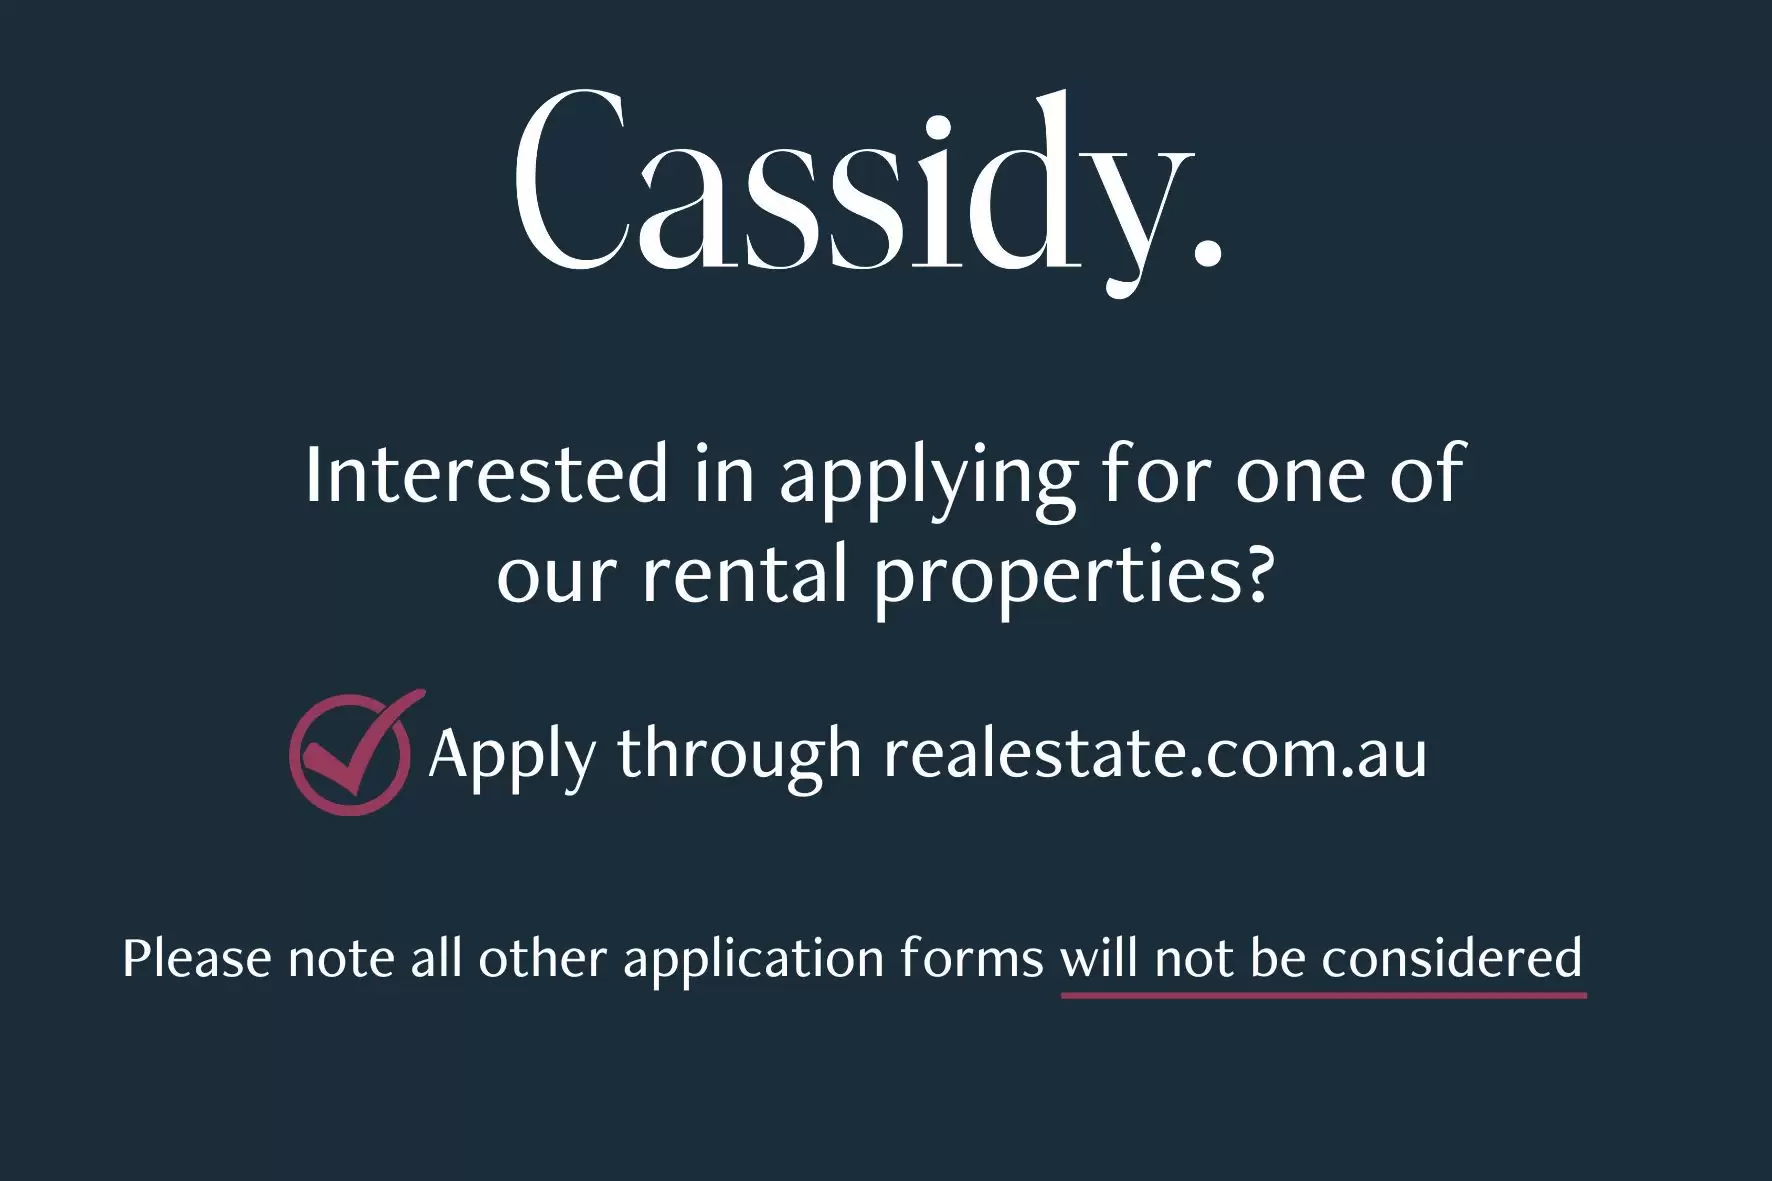 5/12 May Street, Eastwood For Lease by Cassidy Real Estate - image 1